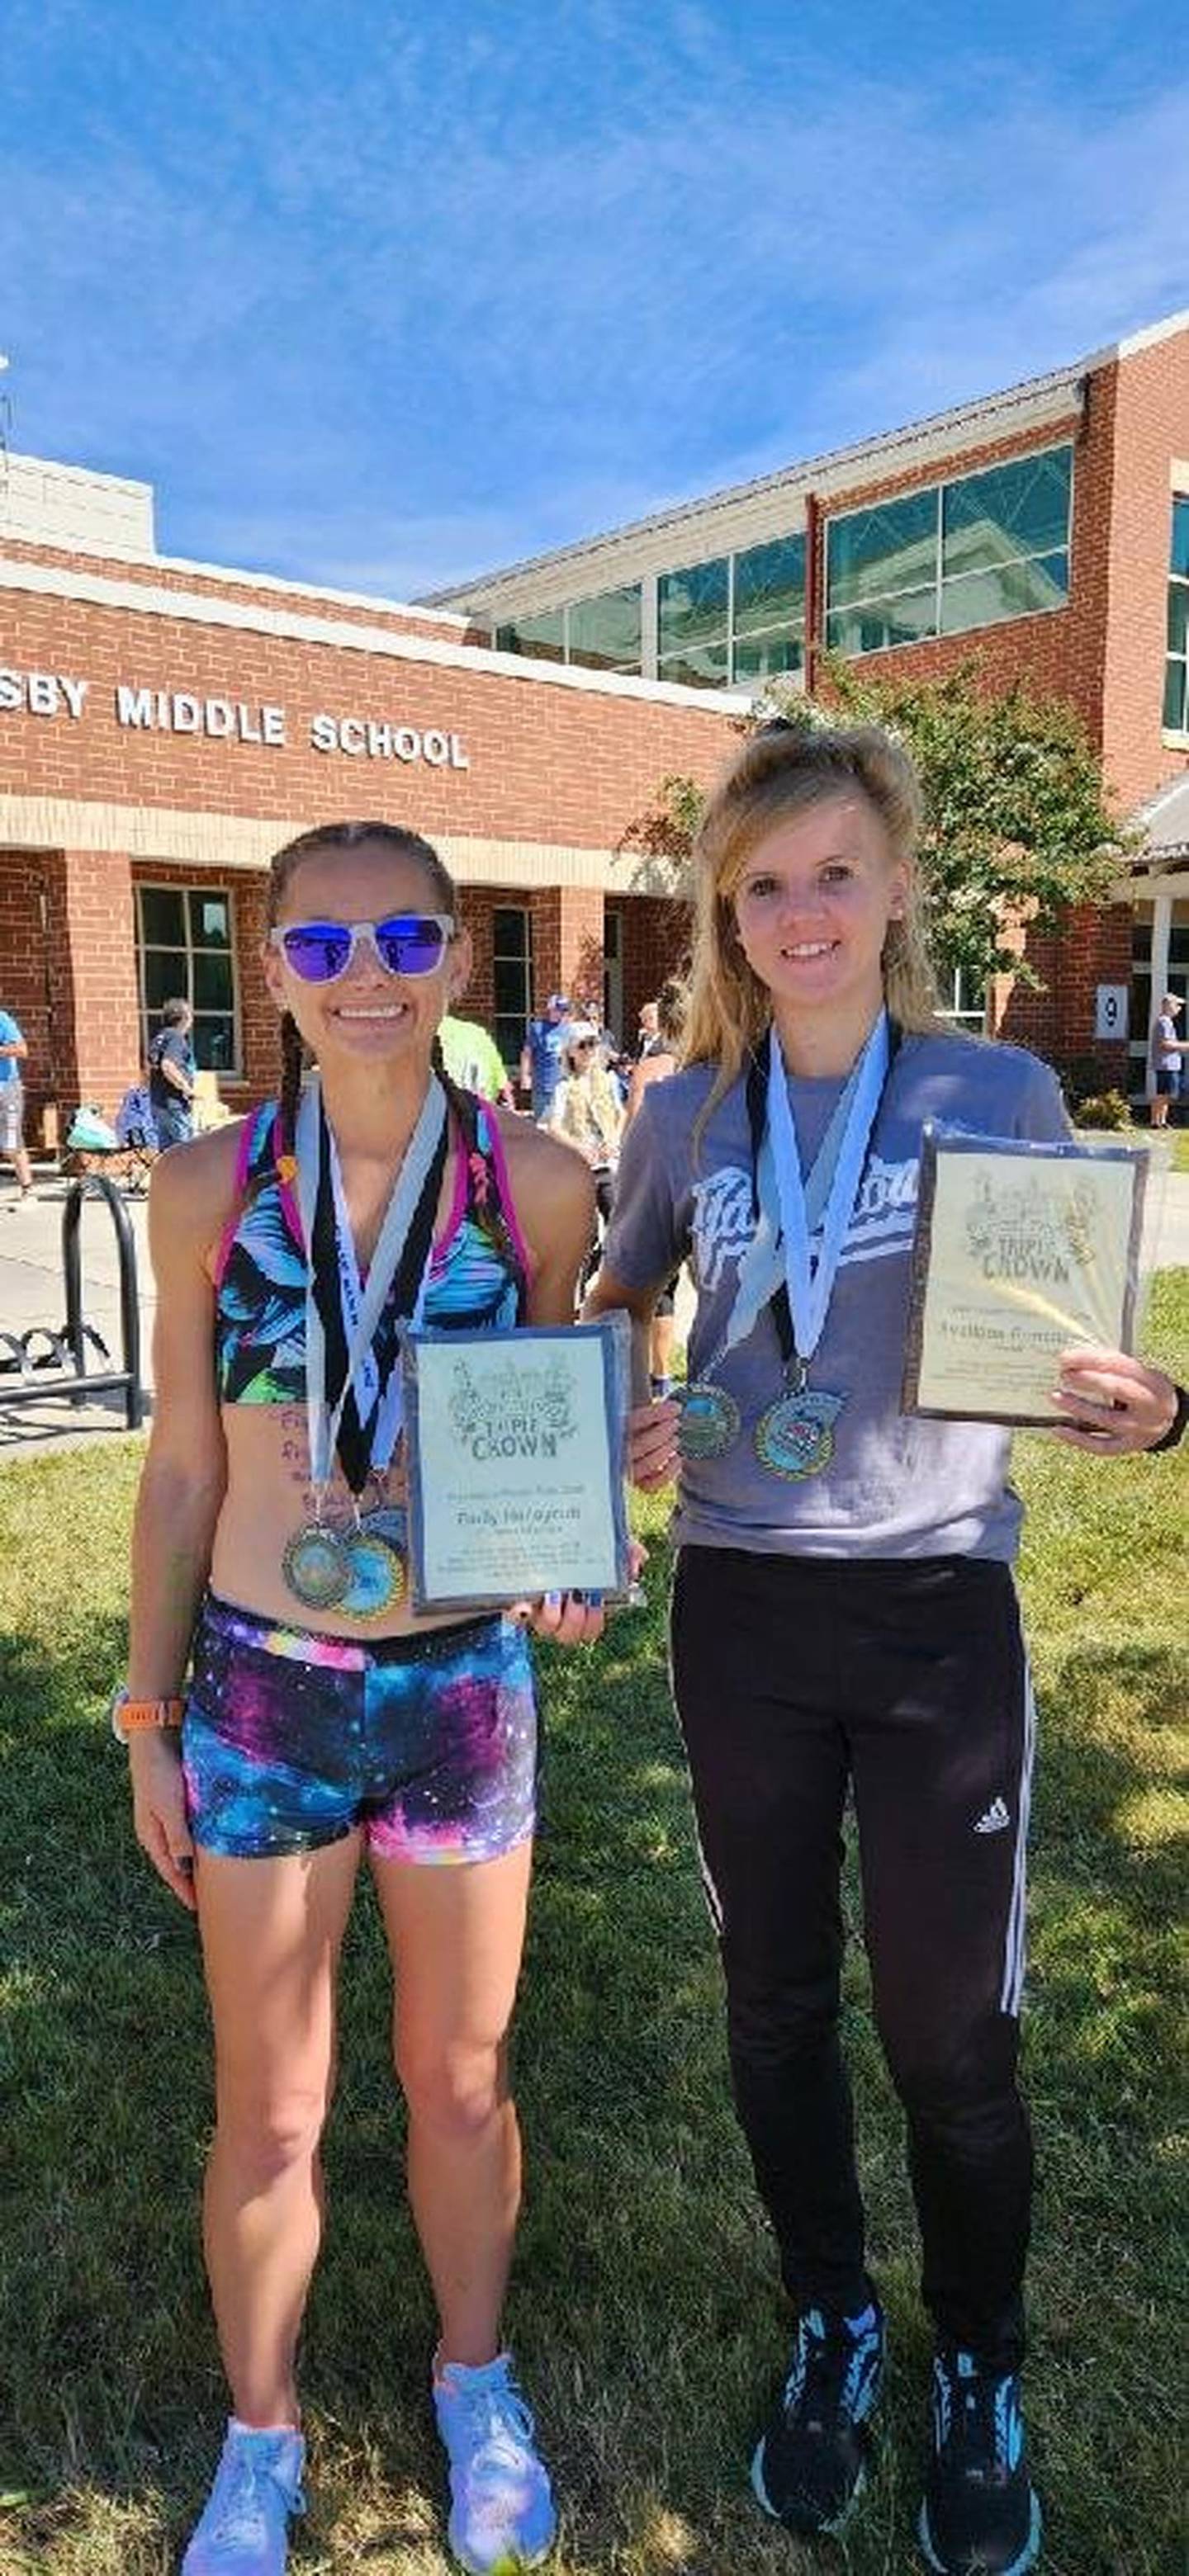 Emily Honeycutt, left, won her fourth consecutive CRR Grand Prix title and fifth in six years. Svitlana Honcharova (formerly known as Svetlana Goncharova) was the runner-up for the second consecutive year. Courtesy of Cindy Fitchett